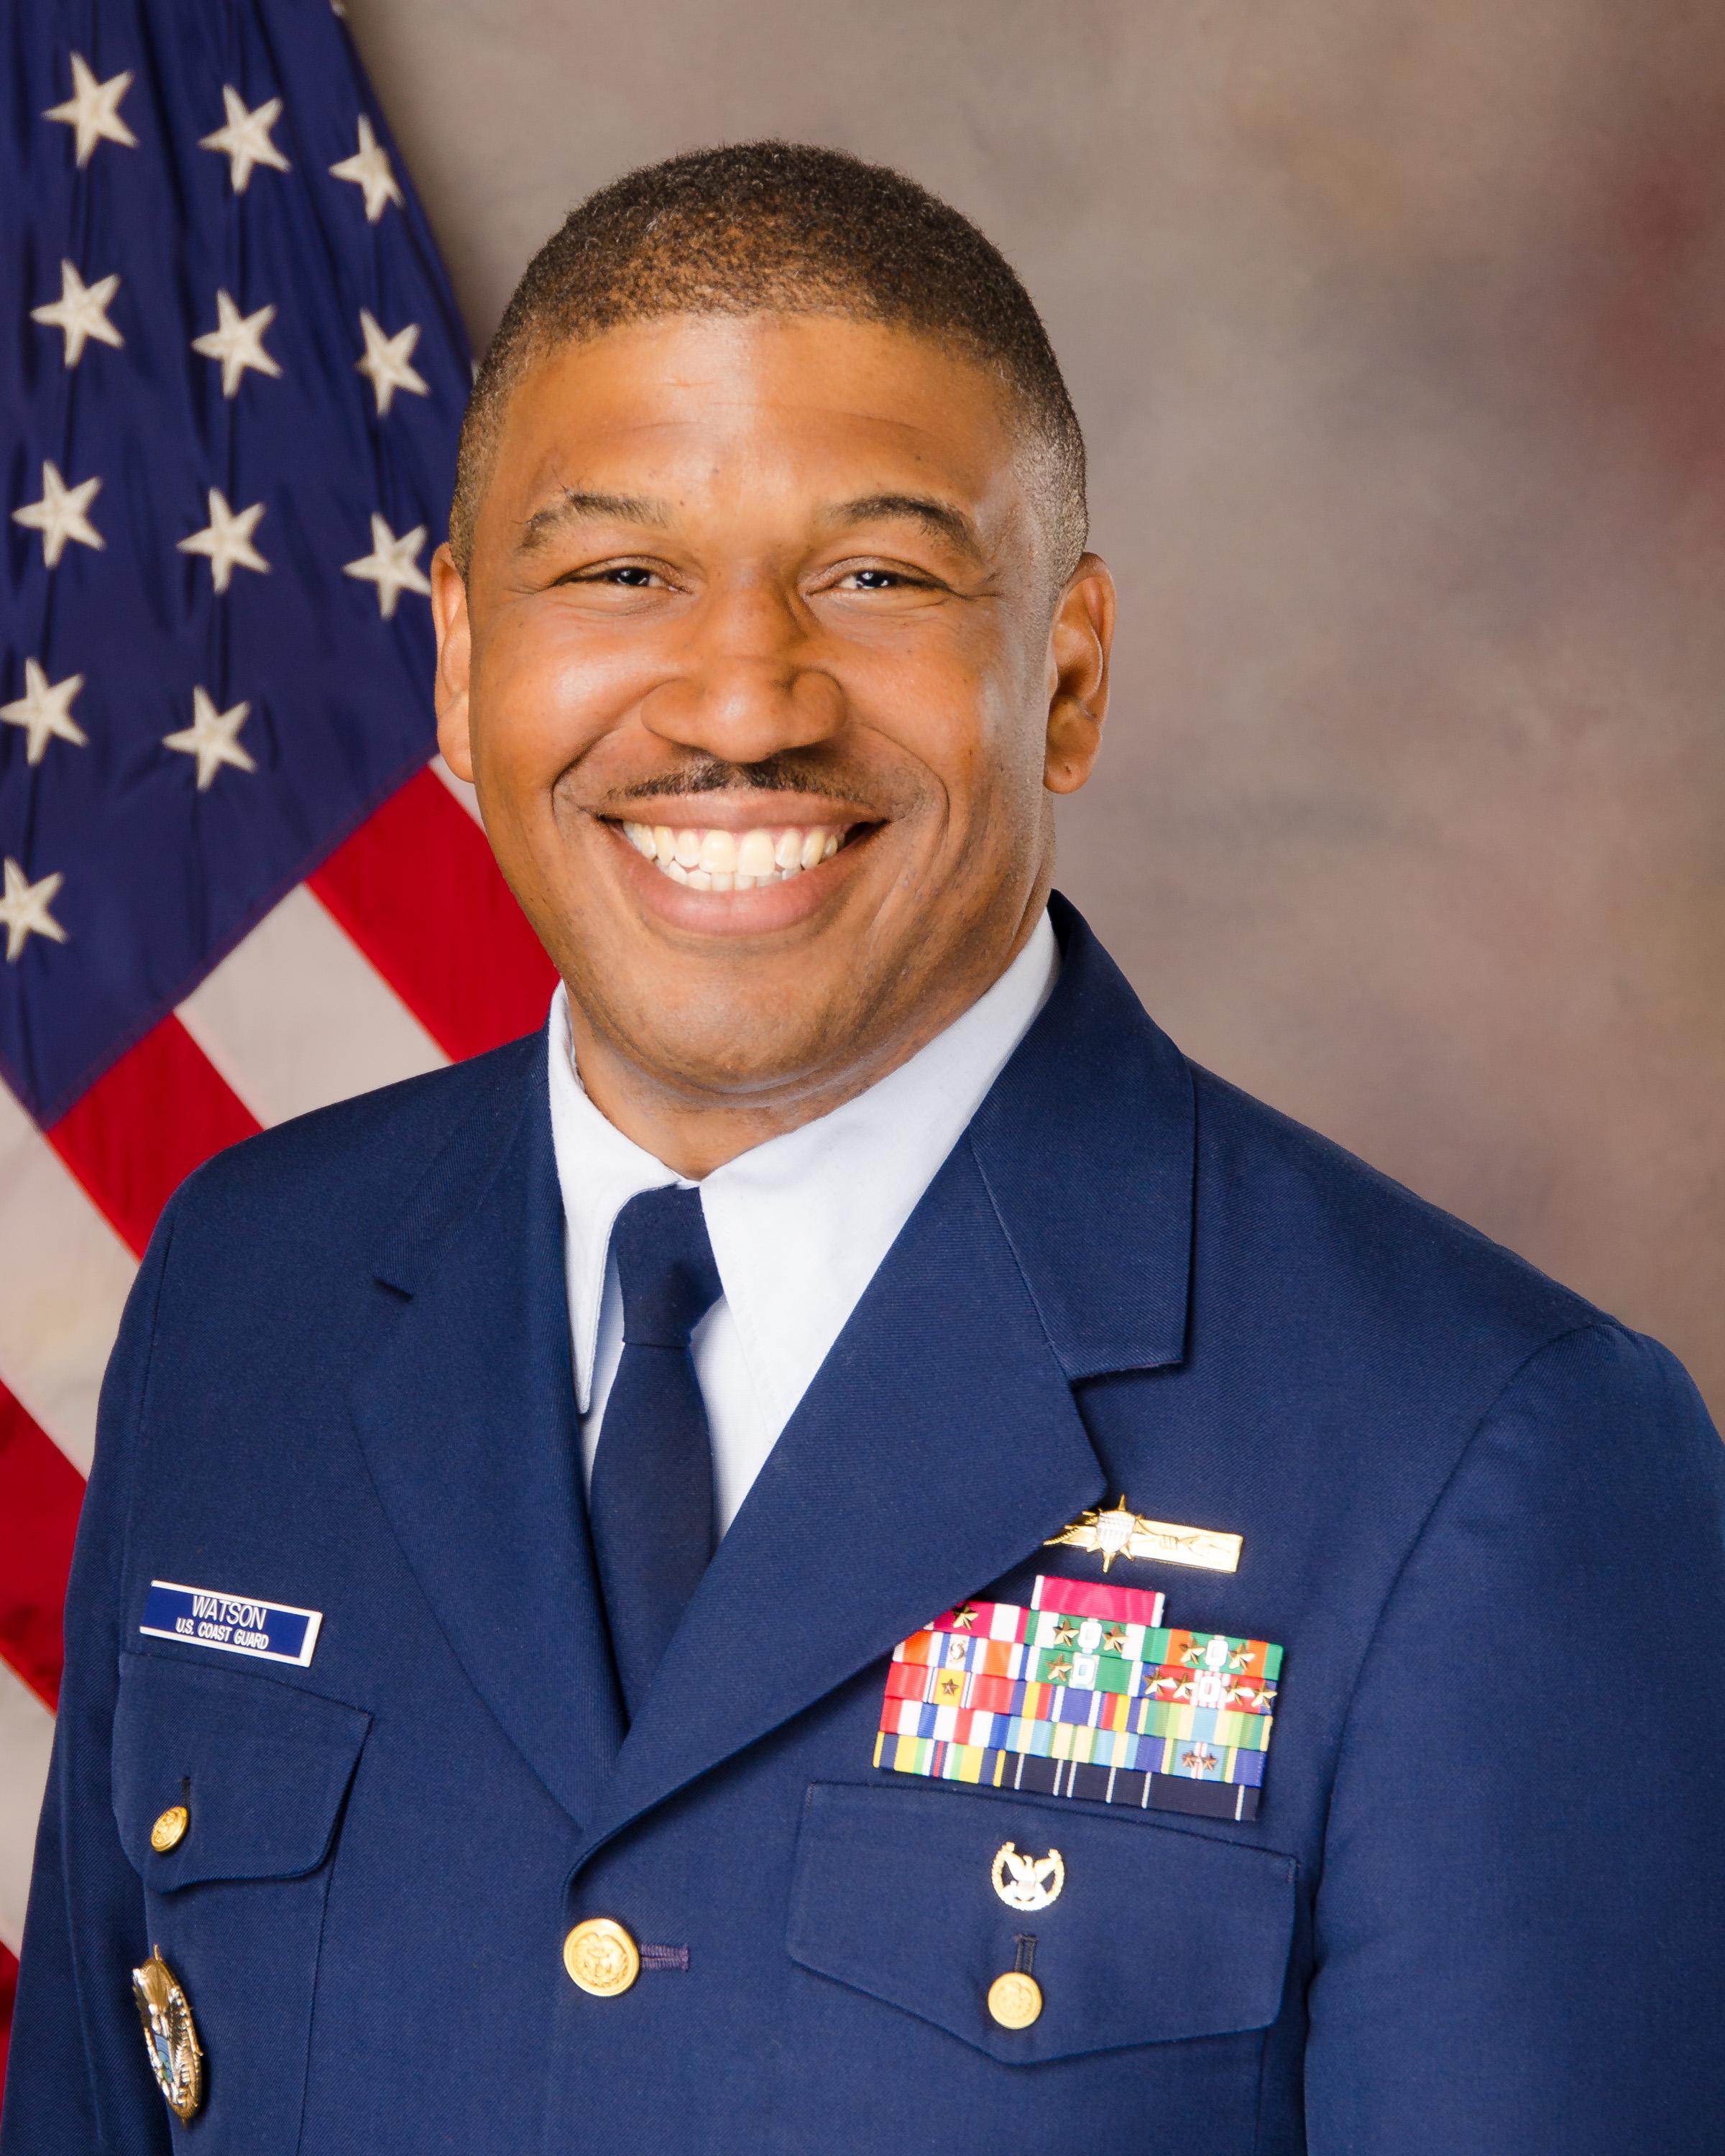 Captain Will E. Watson ('96) in military uniform- photo retrieved from https://www.atlanticarea.uscg.mil/Our-Organization/District-8/District-Units/Sector-New-Orleans/Command-Staff/